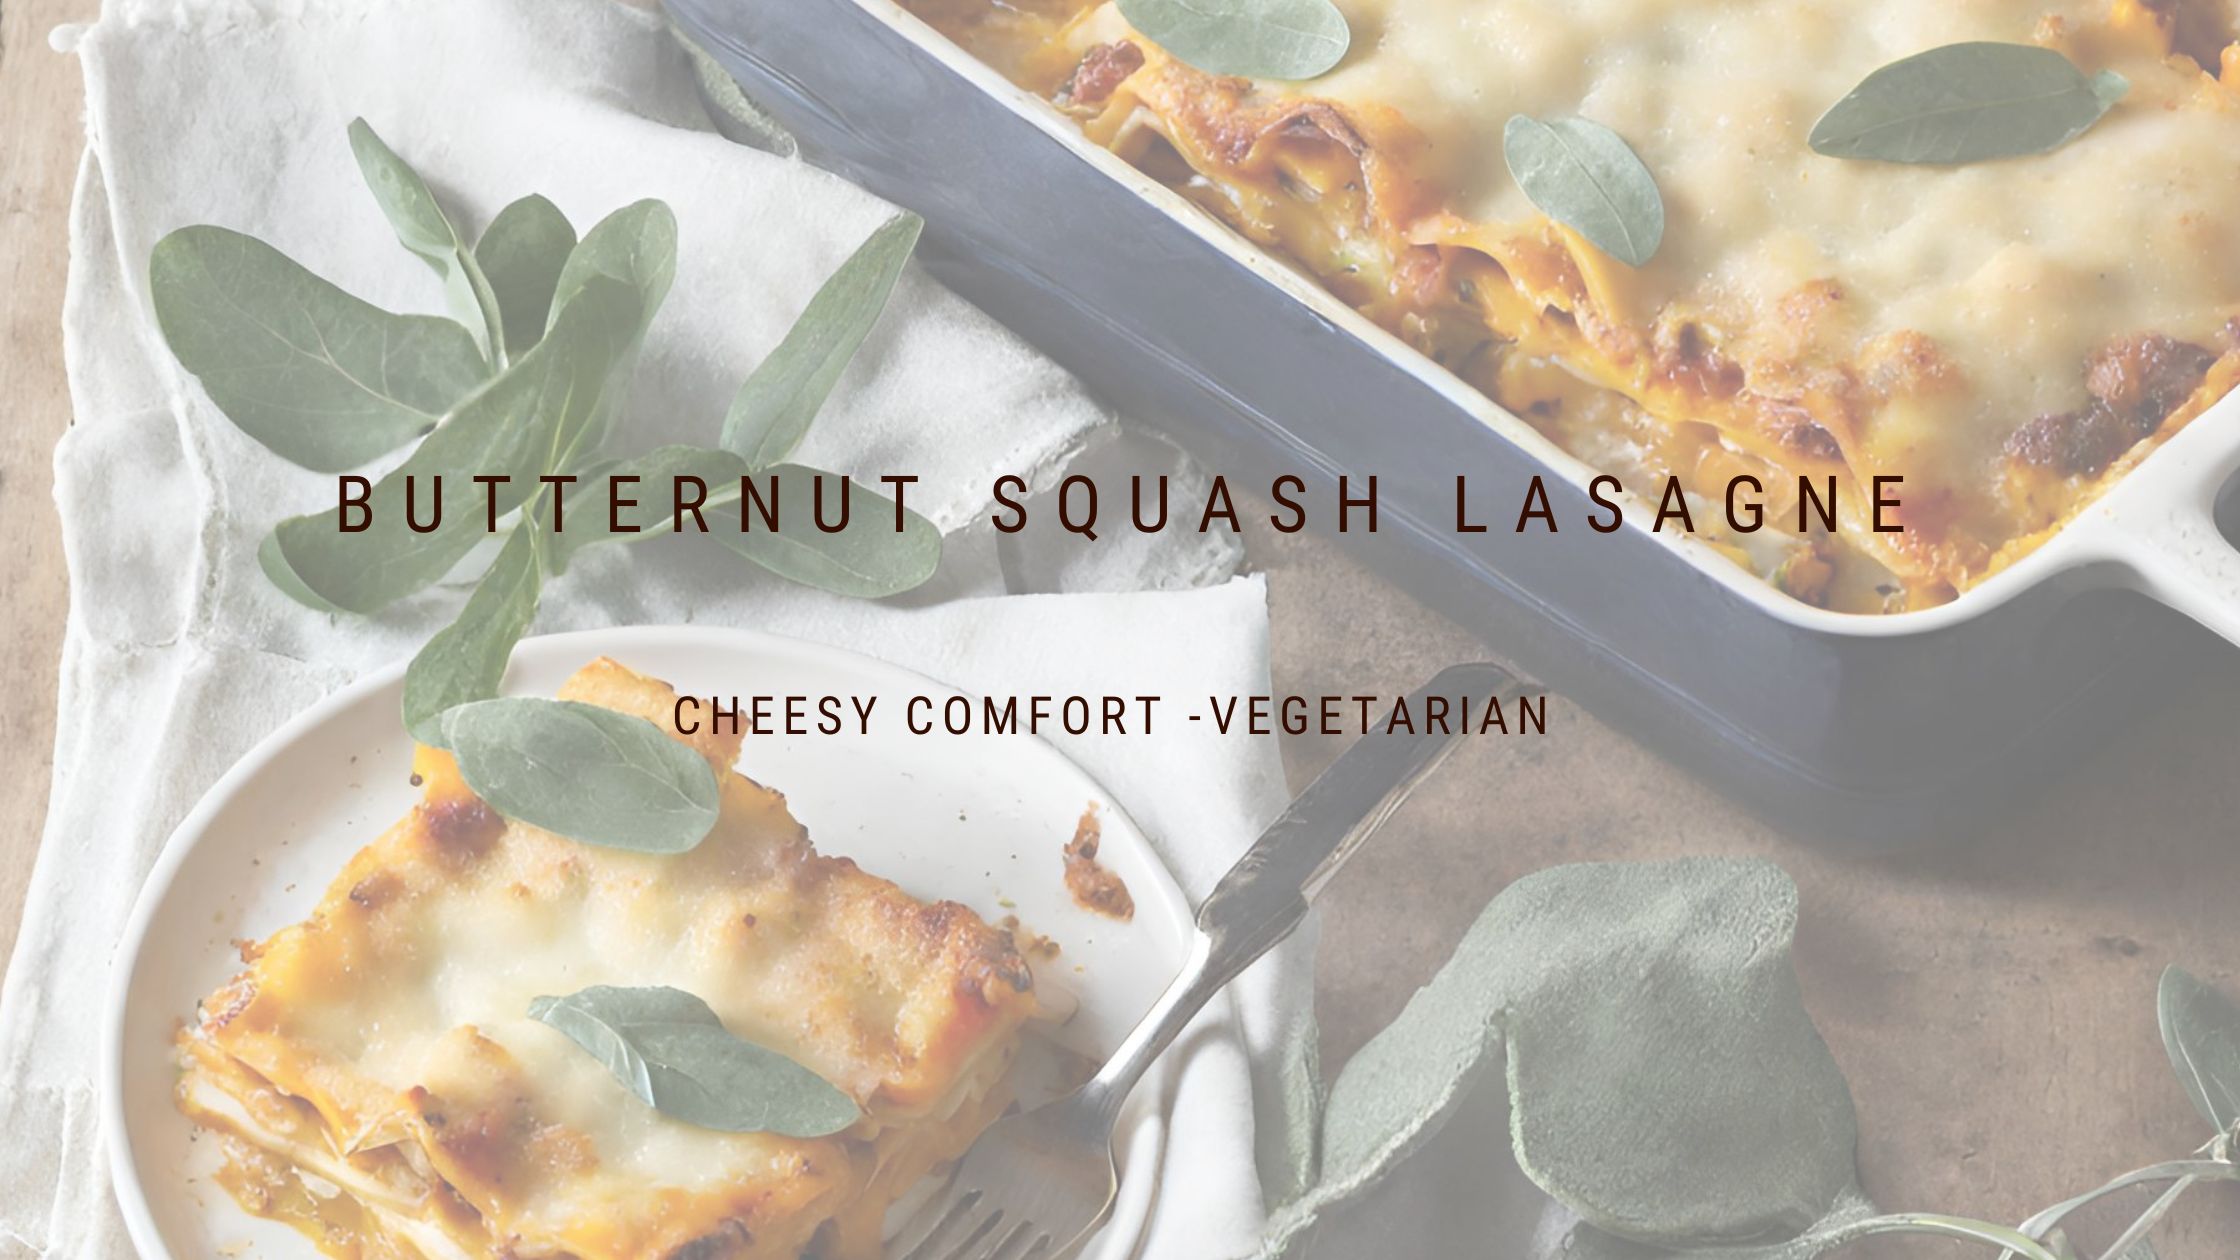 Cheesy Butternut Squash Lasagne with Sage